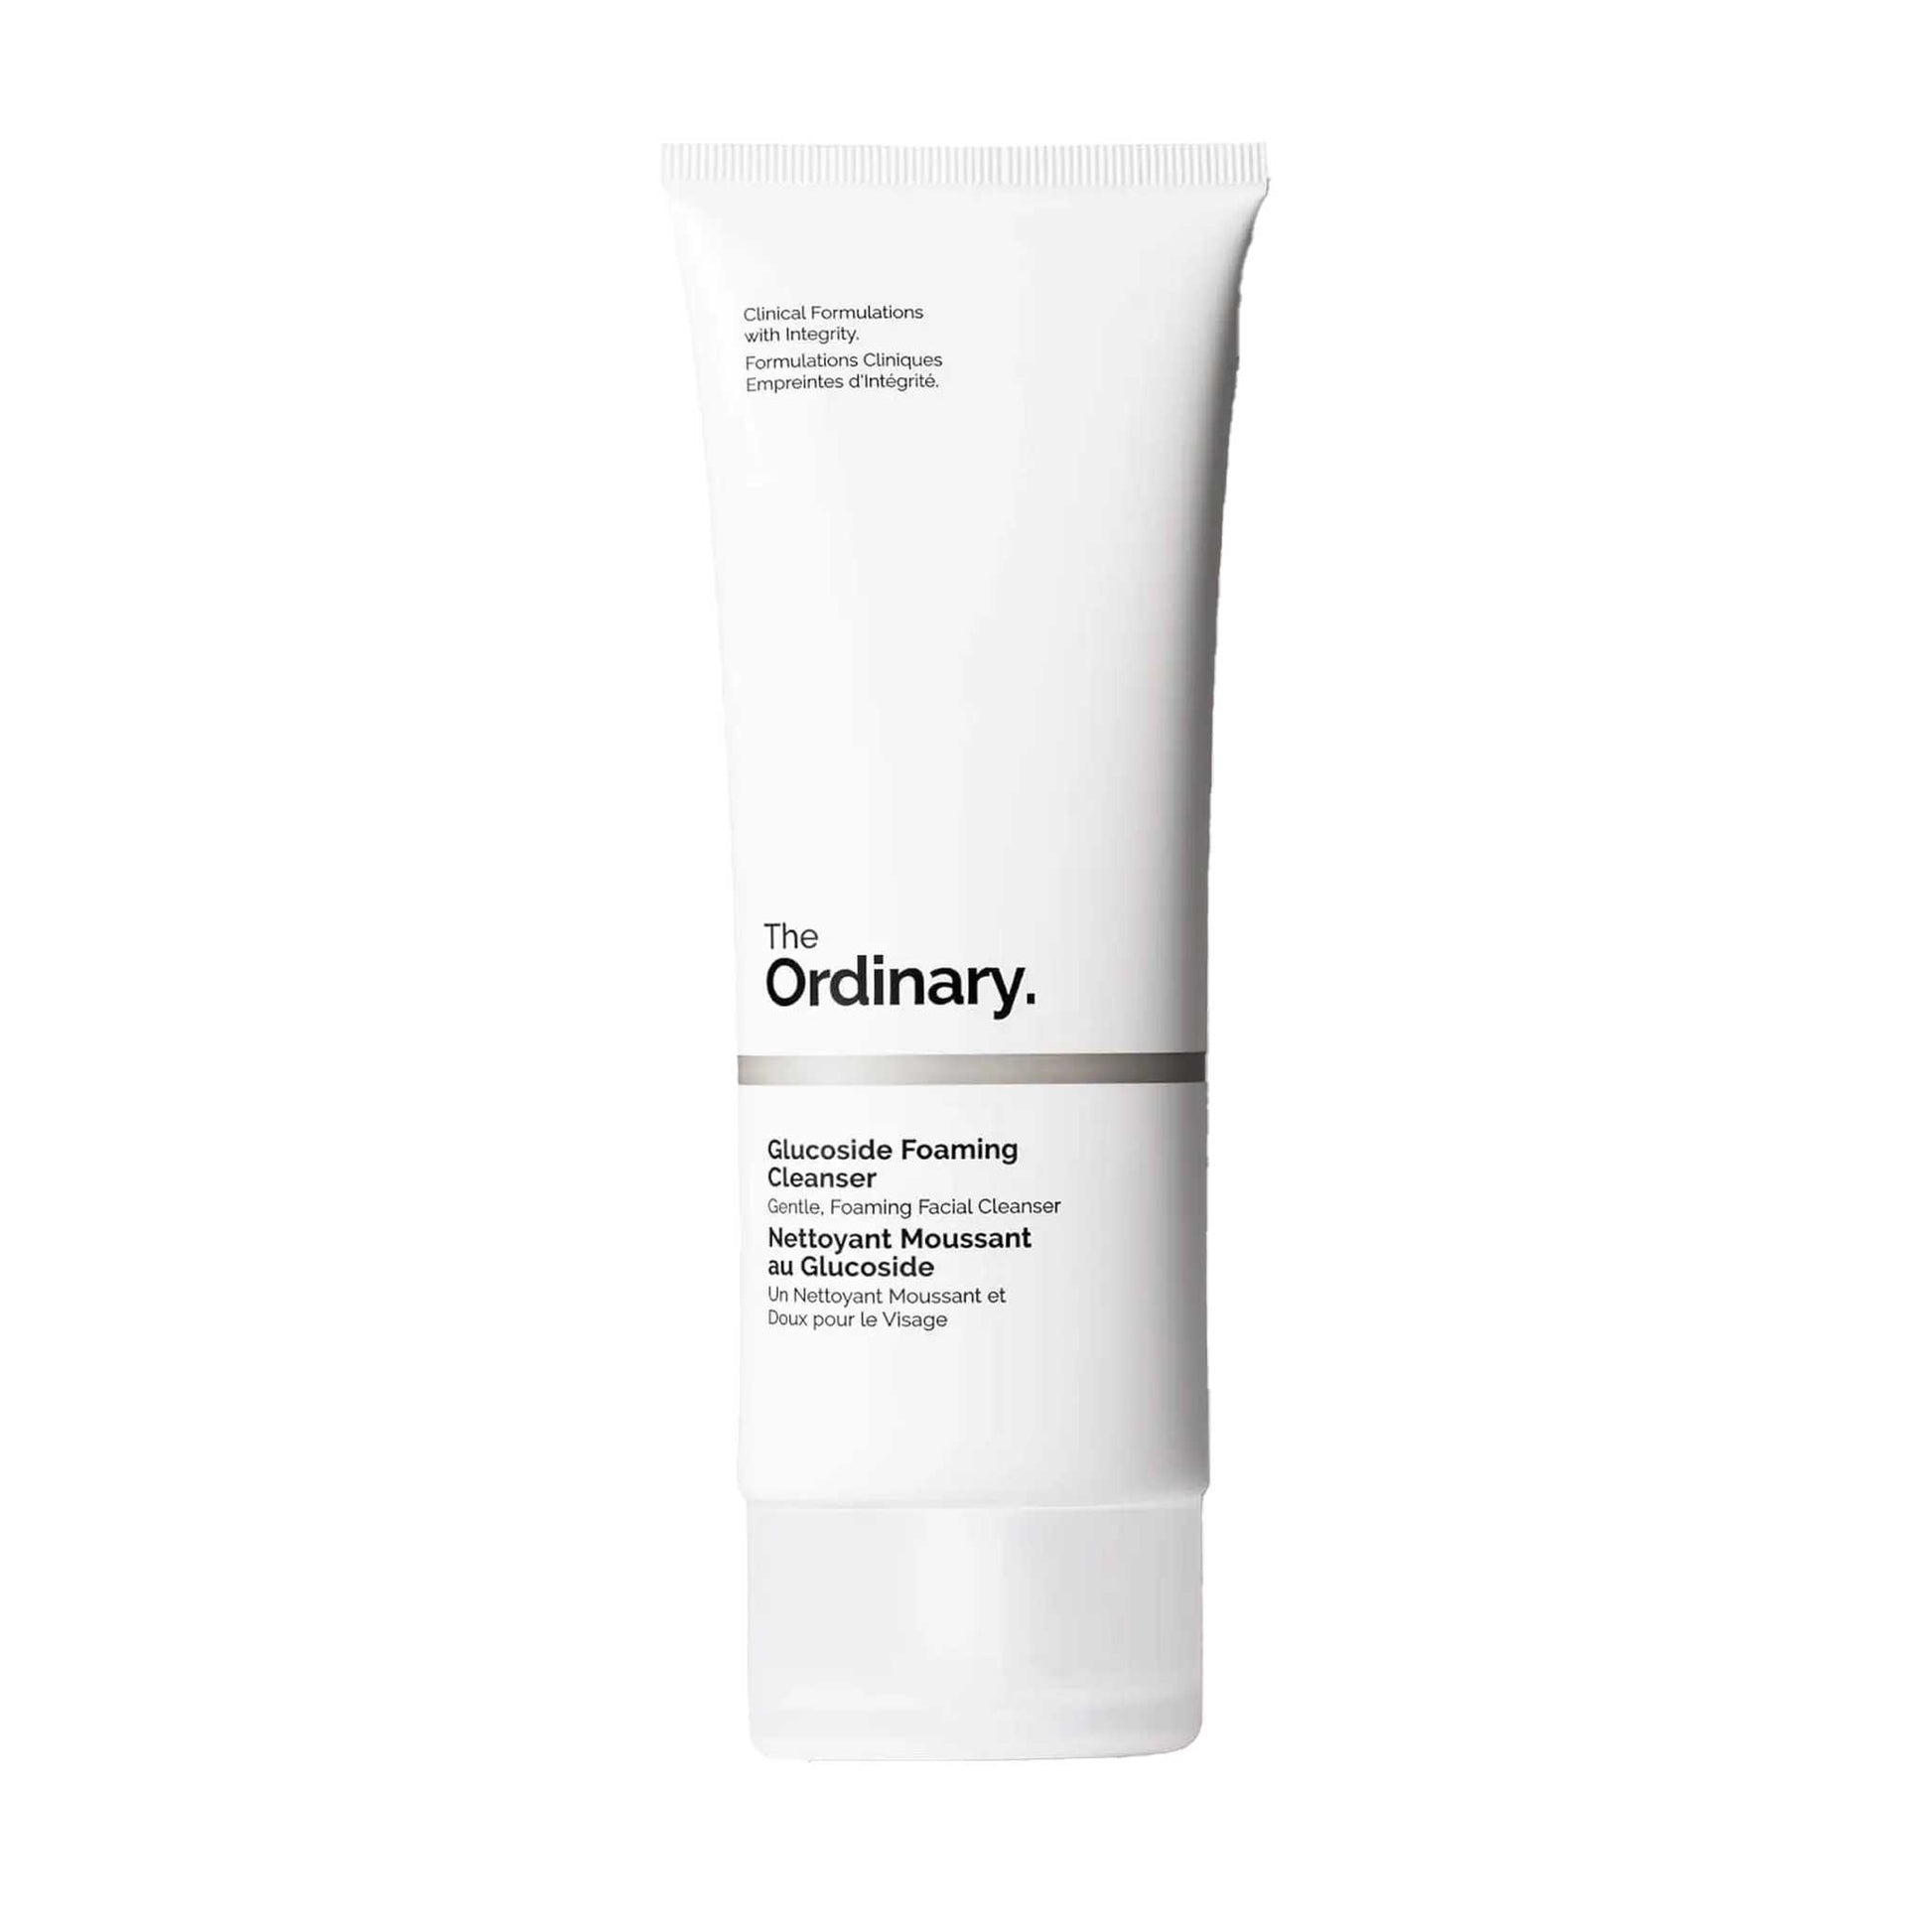 THE ORDINARY GLUCOSIDE FOAMING CLEANSER 150 ML The Ordinary